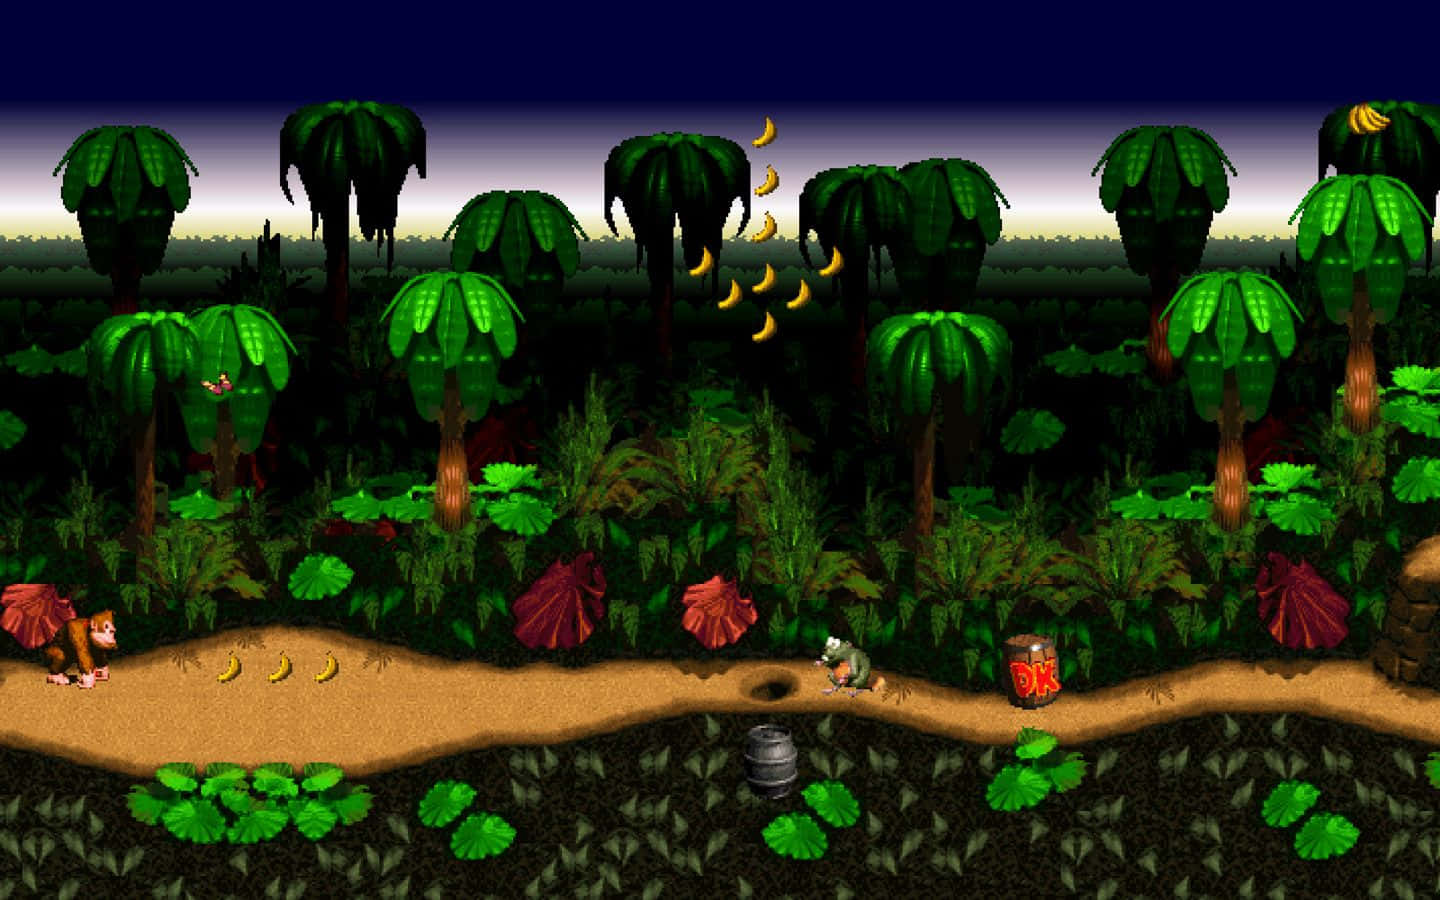 Diddy Kong posing in action on a scenic jungle background Wallpaper